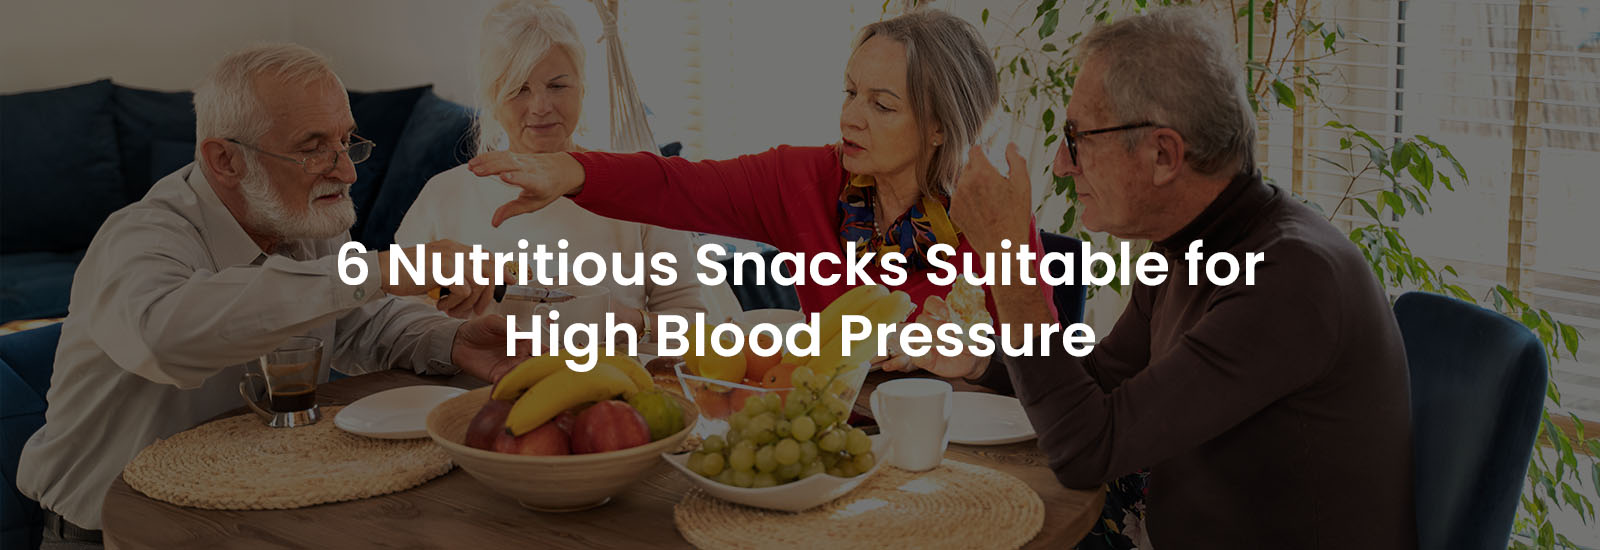 6 Nutritious Snacks Suitable for High Blood Pressure | Banner Image